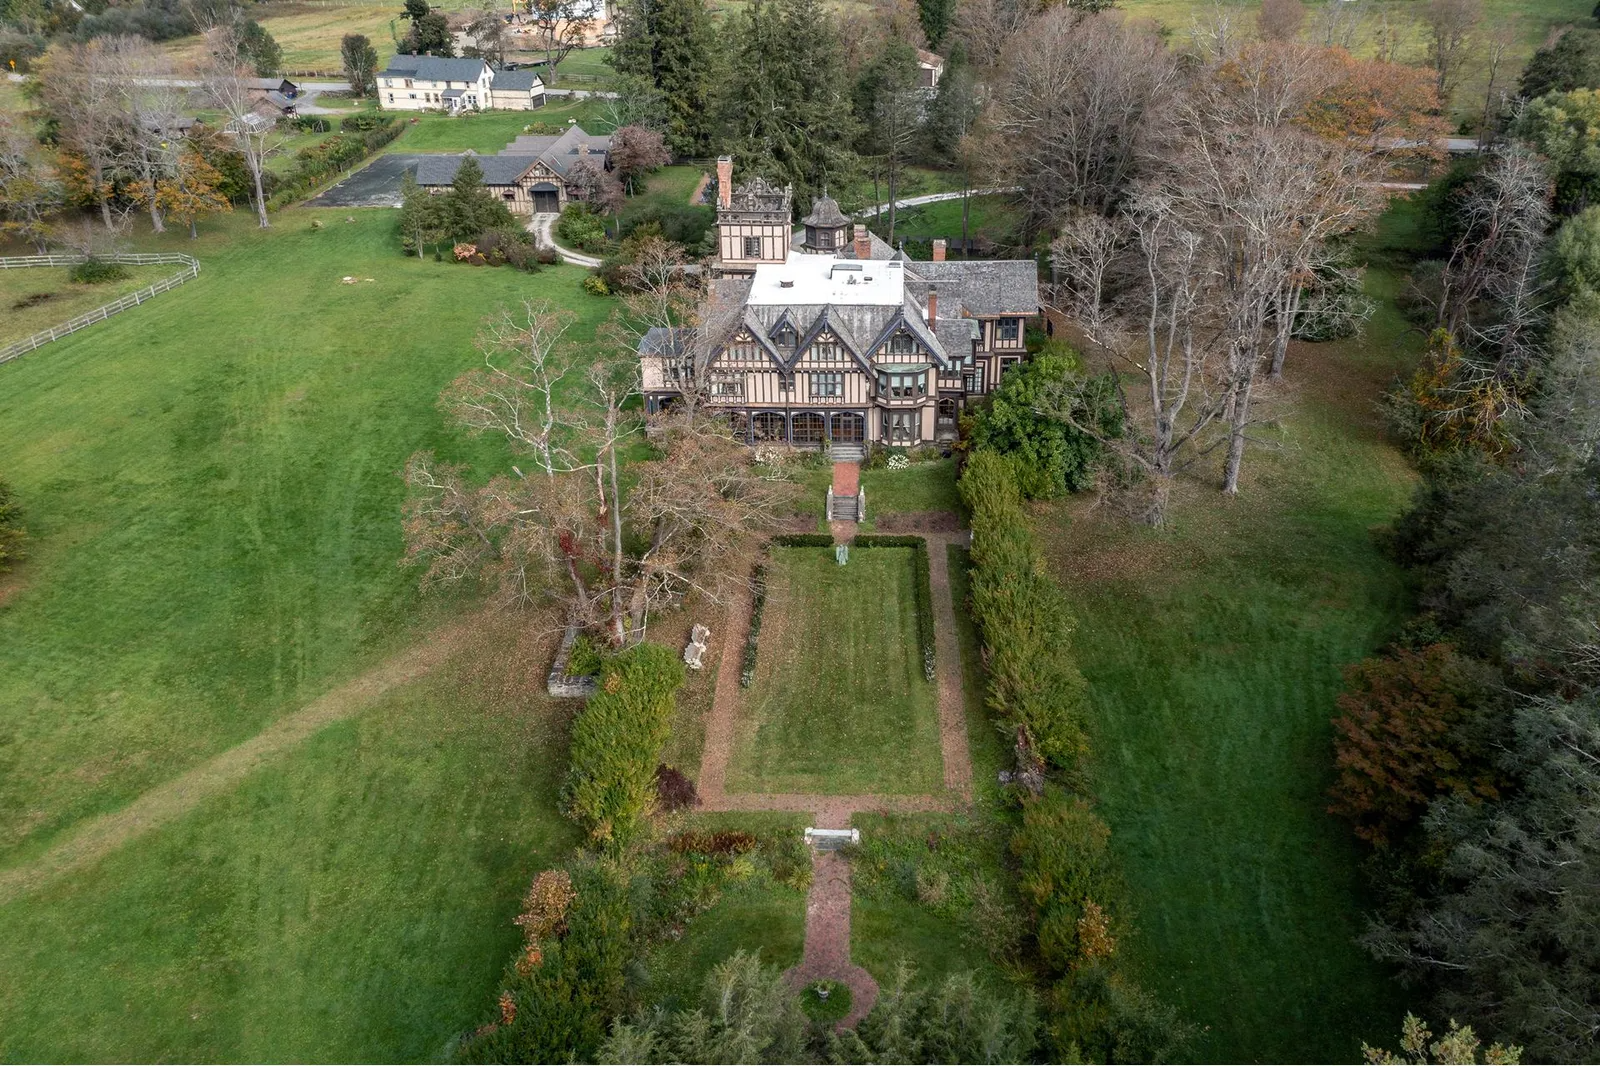 aerial view showing gardens at rear of the house